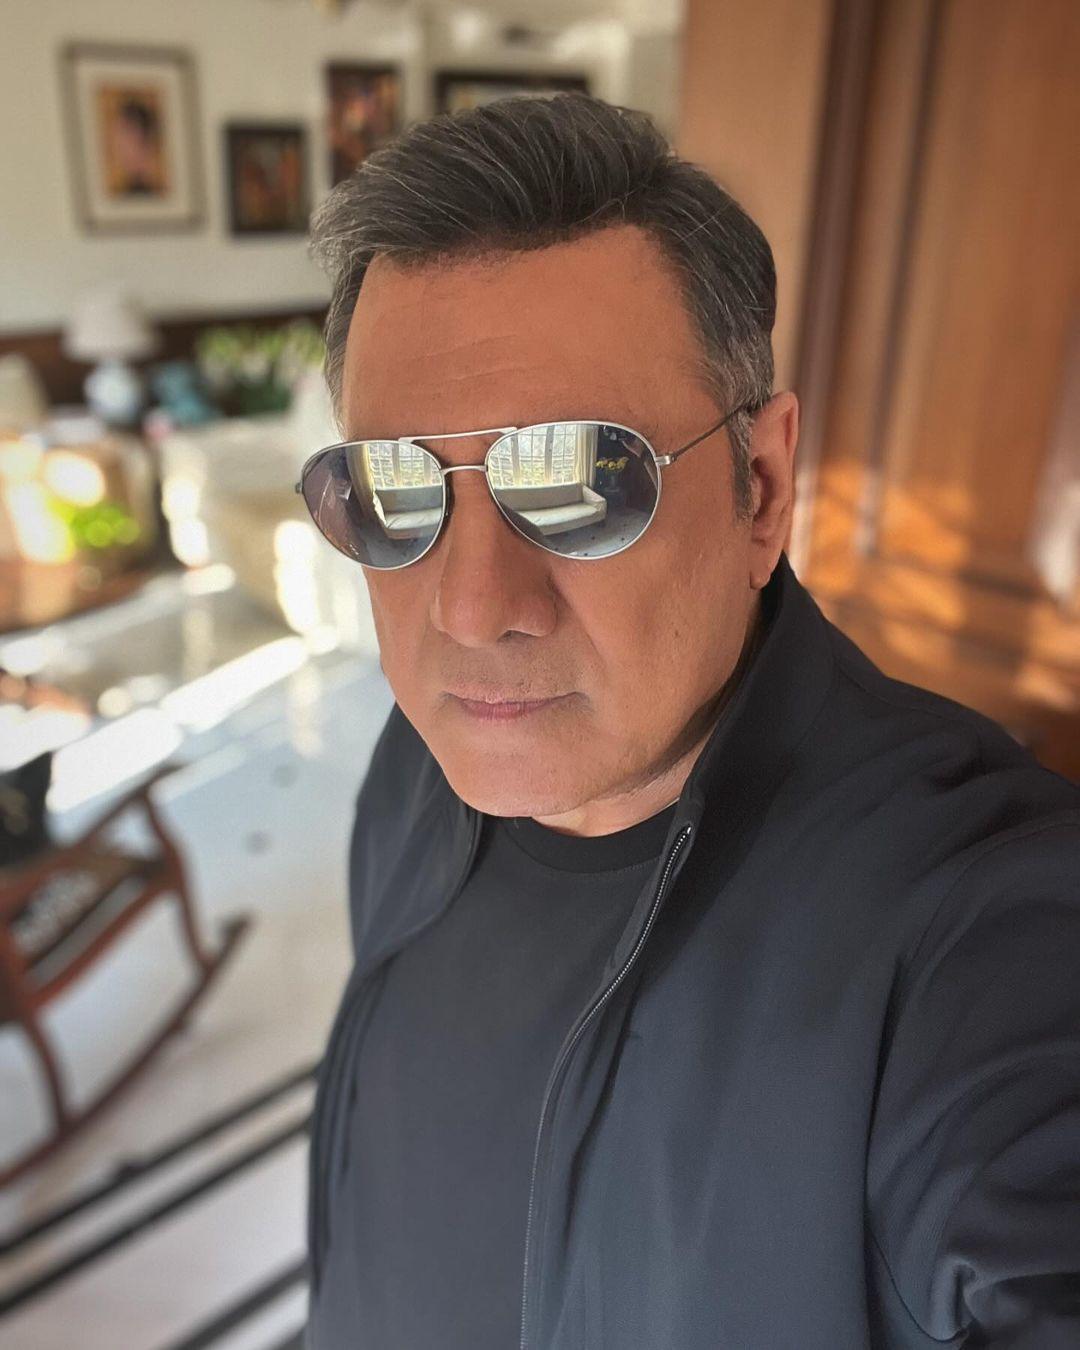 Before he answered his call to acting, Boman Irani worked as a waiter at the Taj Mahal Palace and Tower for two years.